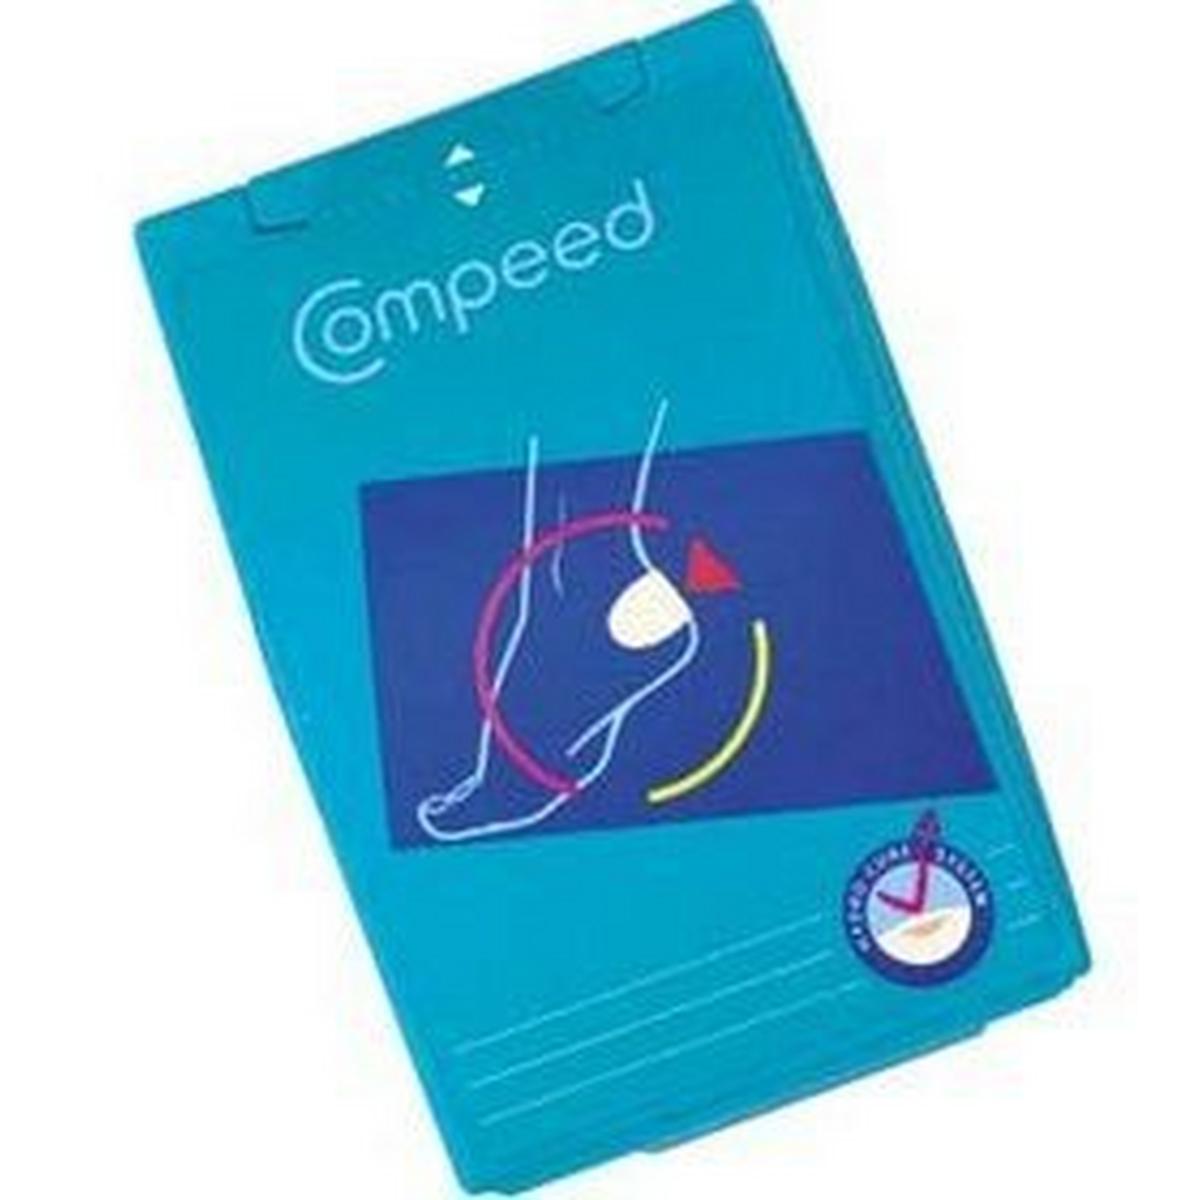 Compeed Small Blister Plasters